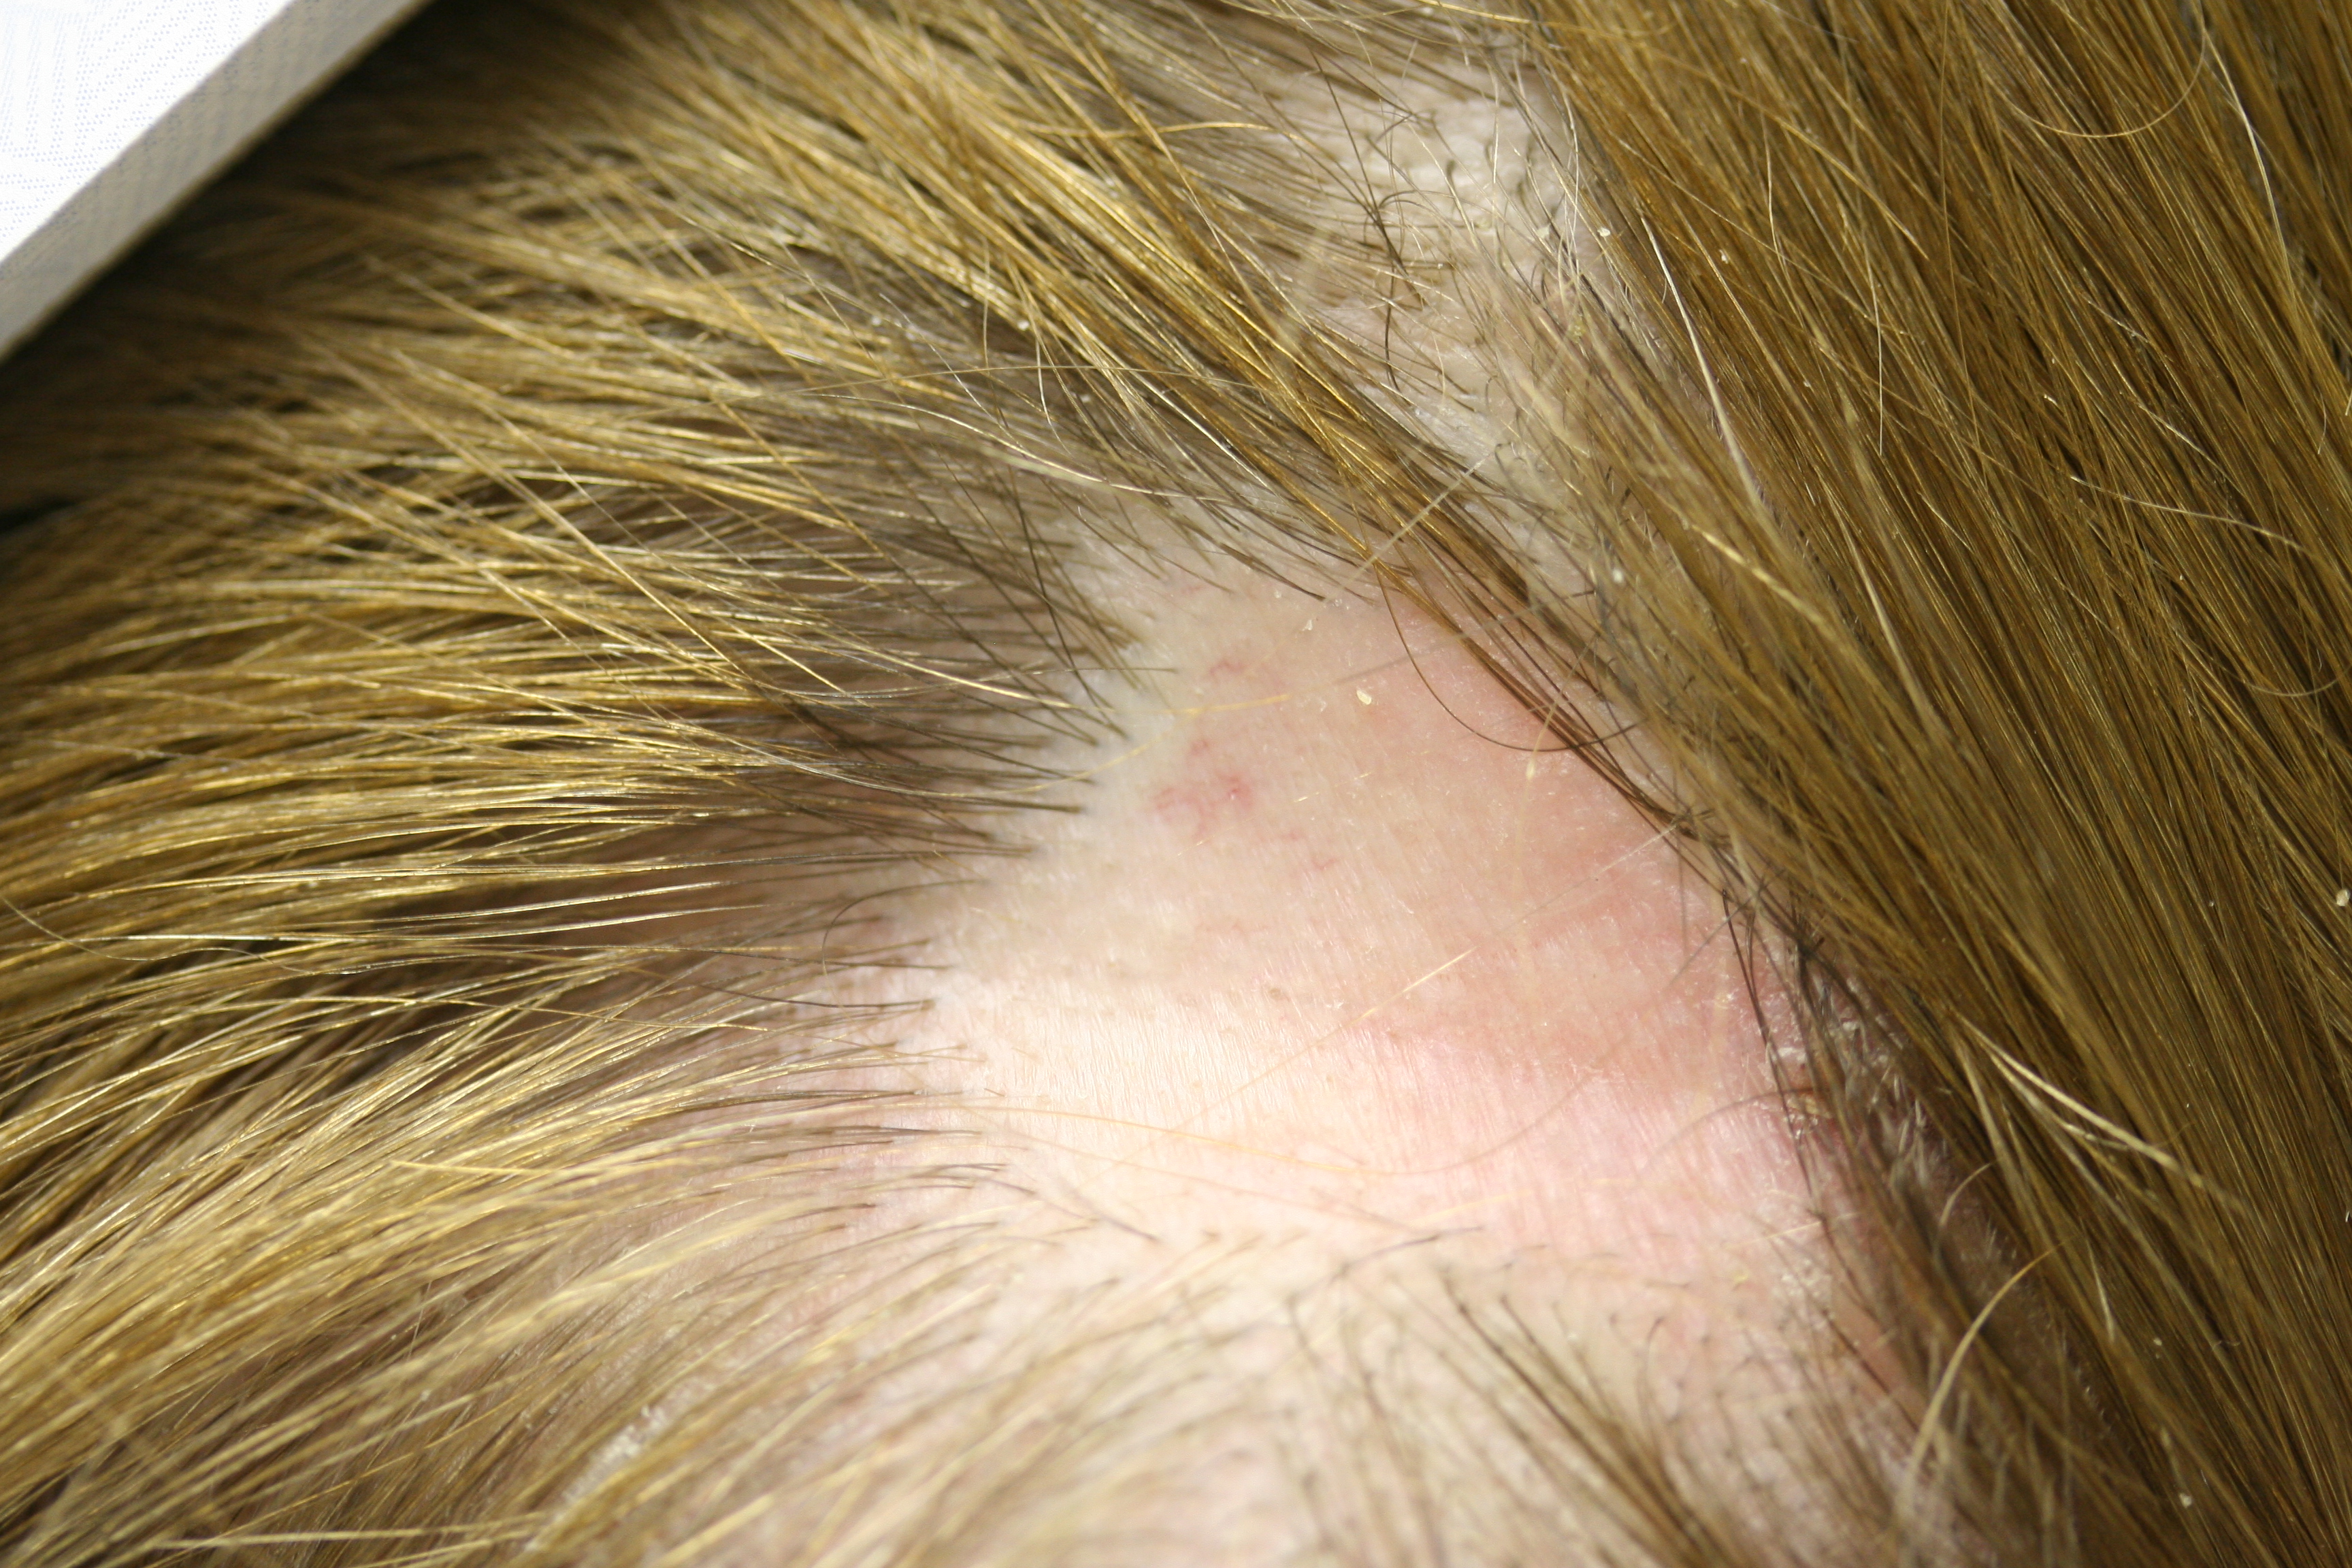 Alopecia areata.  Localized hair loss usually does not evolve into alopecia totalis for most patients.